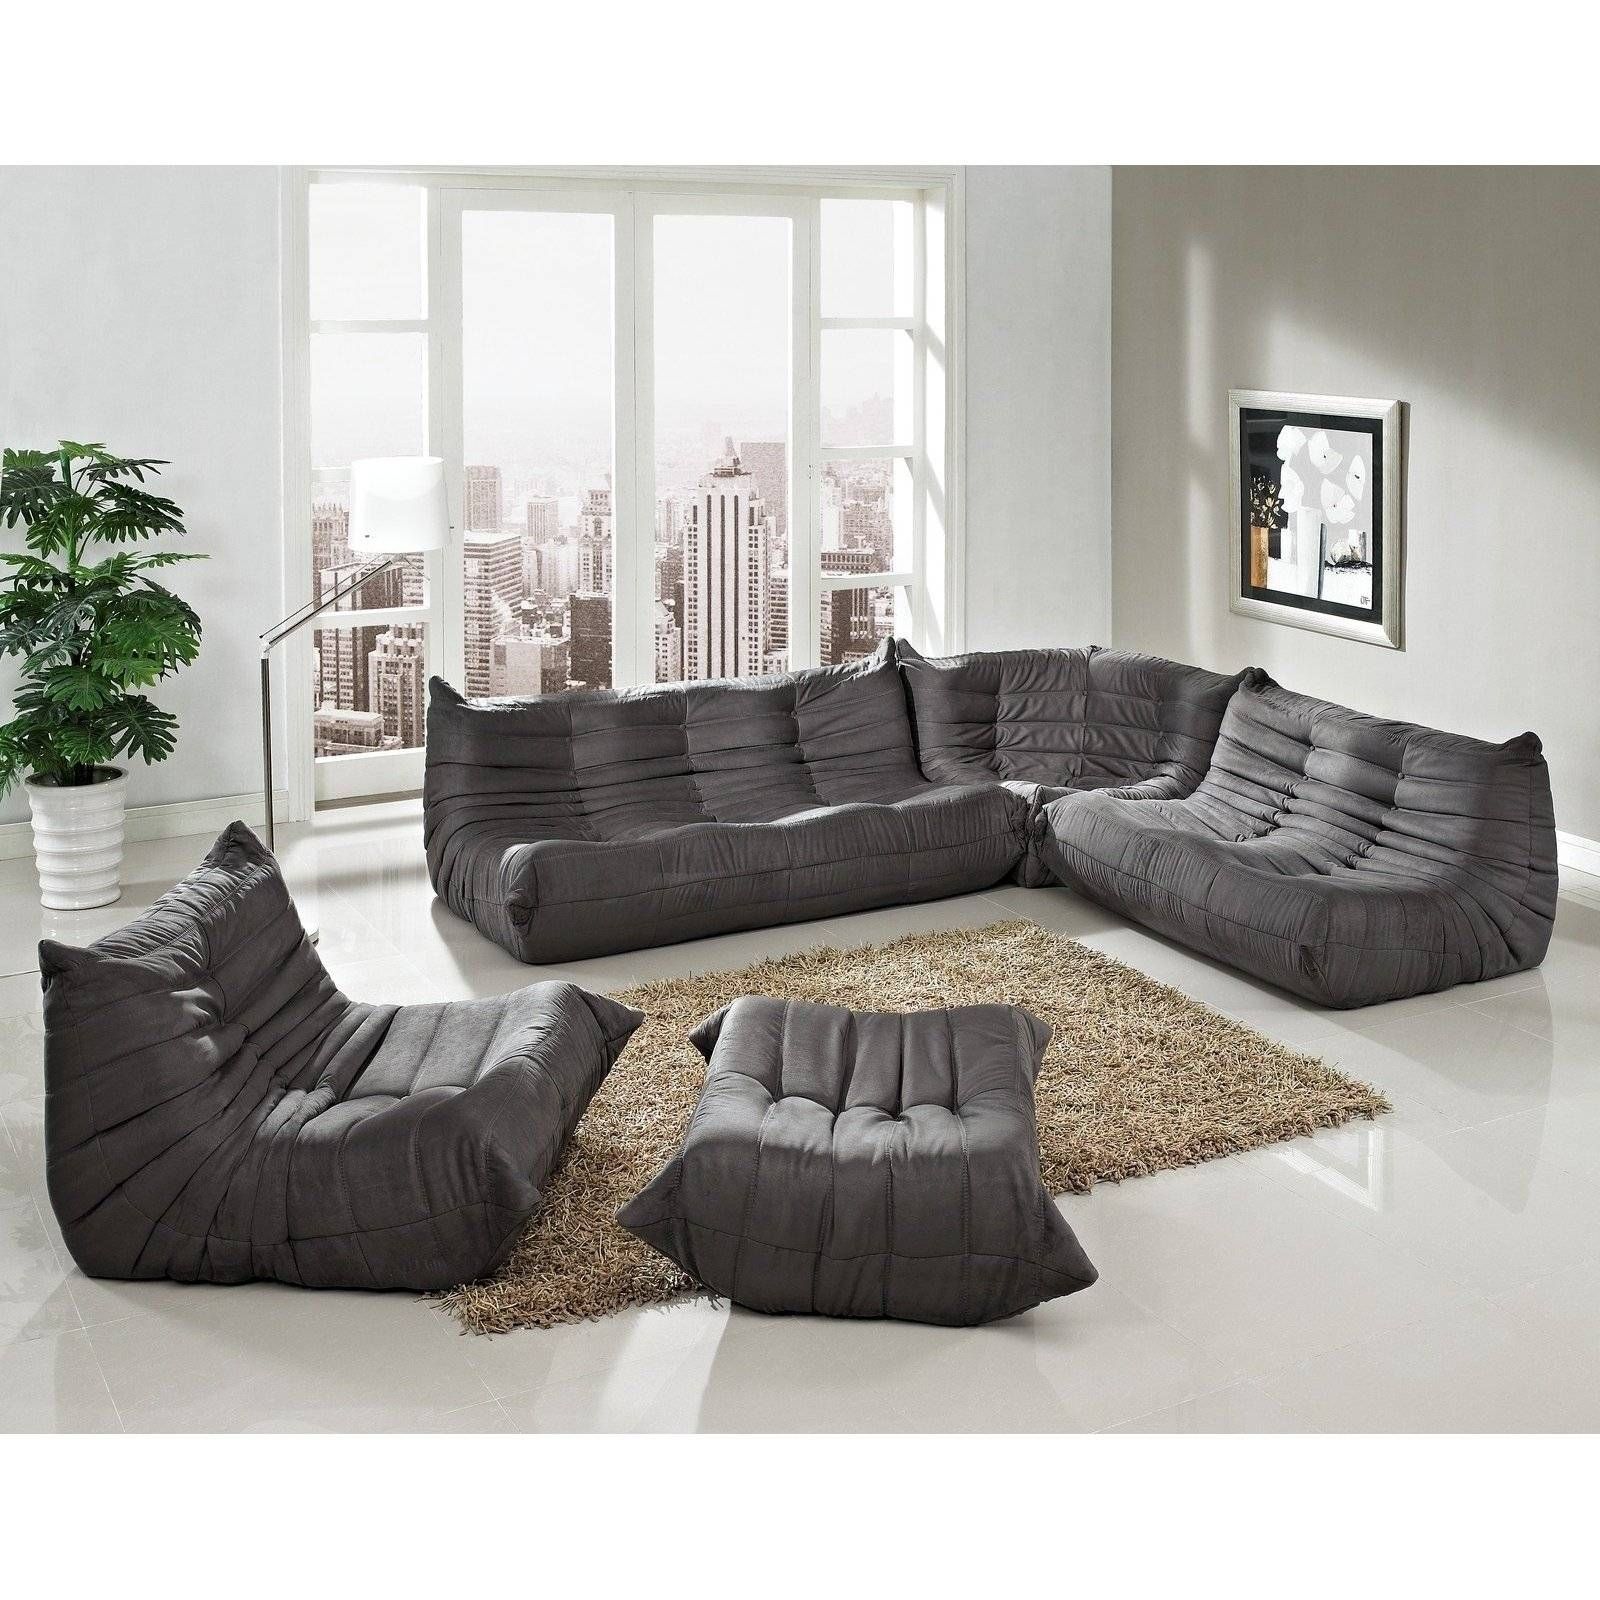 Featured Photo of The 30 Best Collection of Leather Modular Sectional Sofas